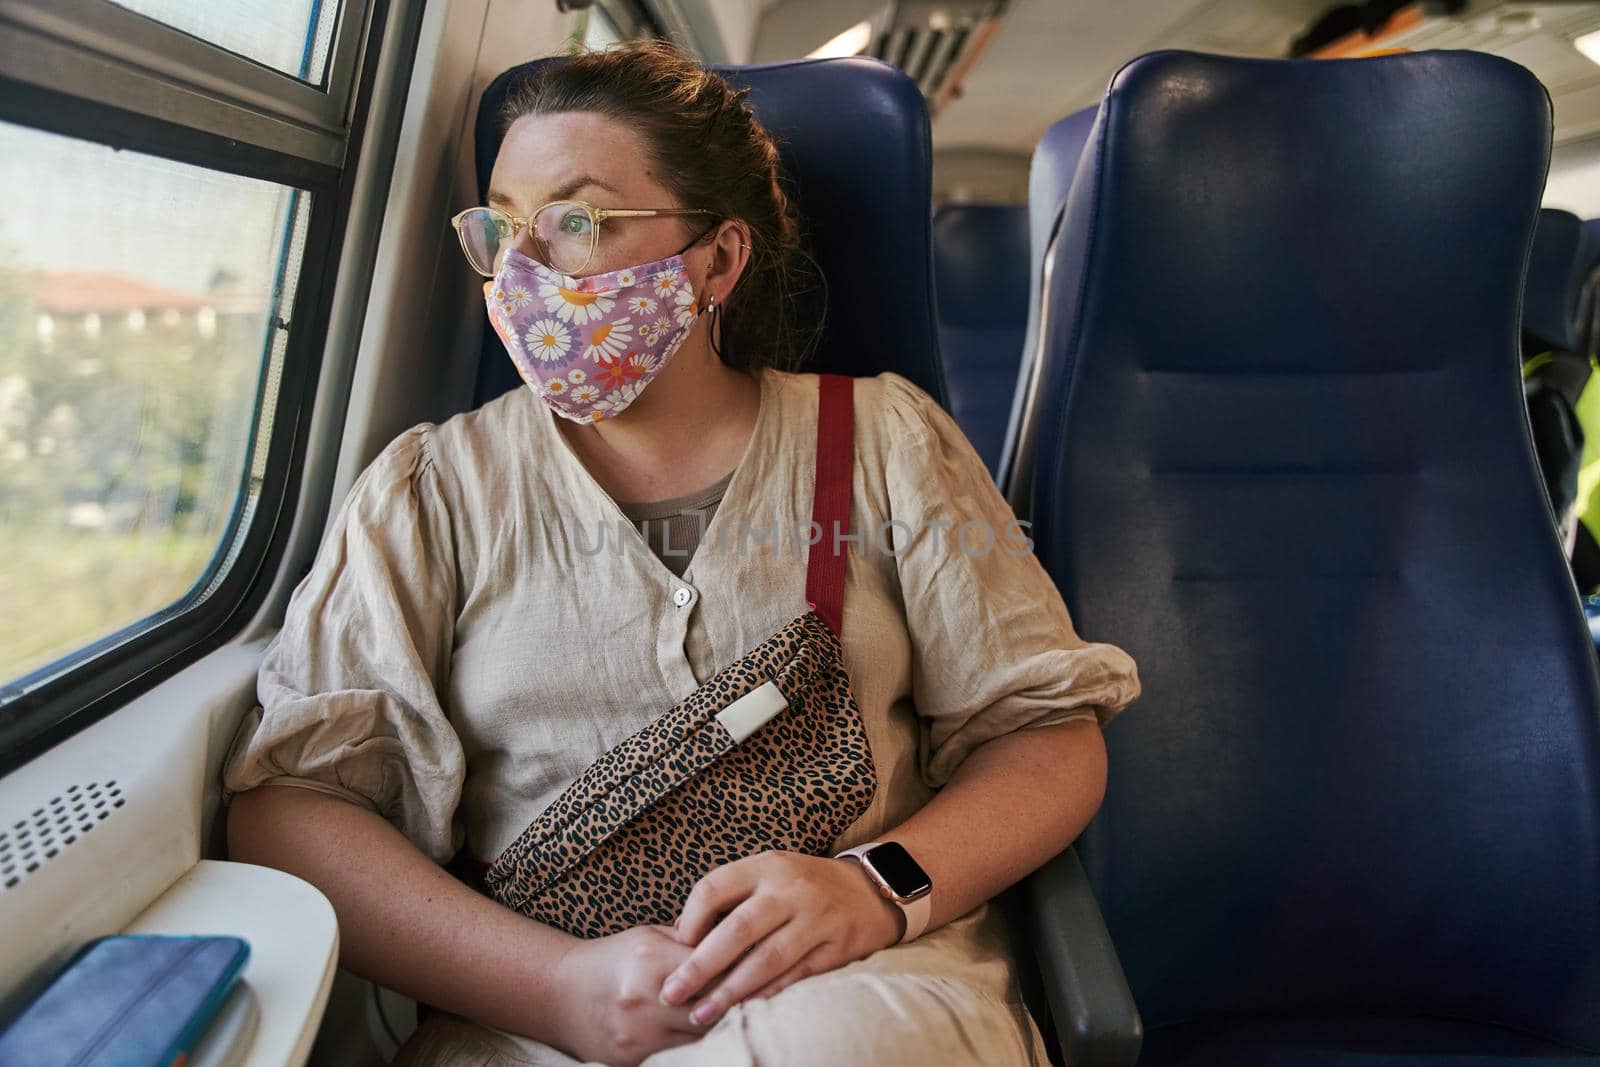 A girl in glasses and a medical mask riding a train and looking out the window. High quality photo